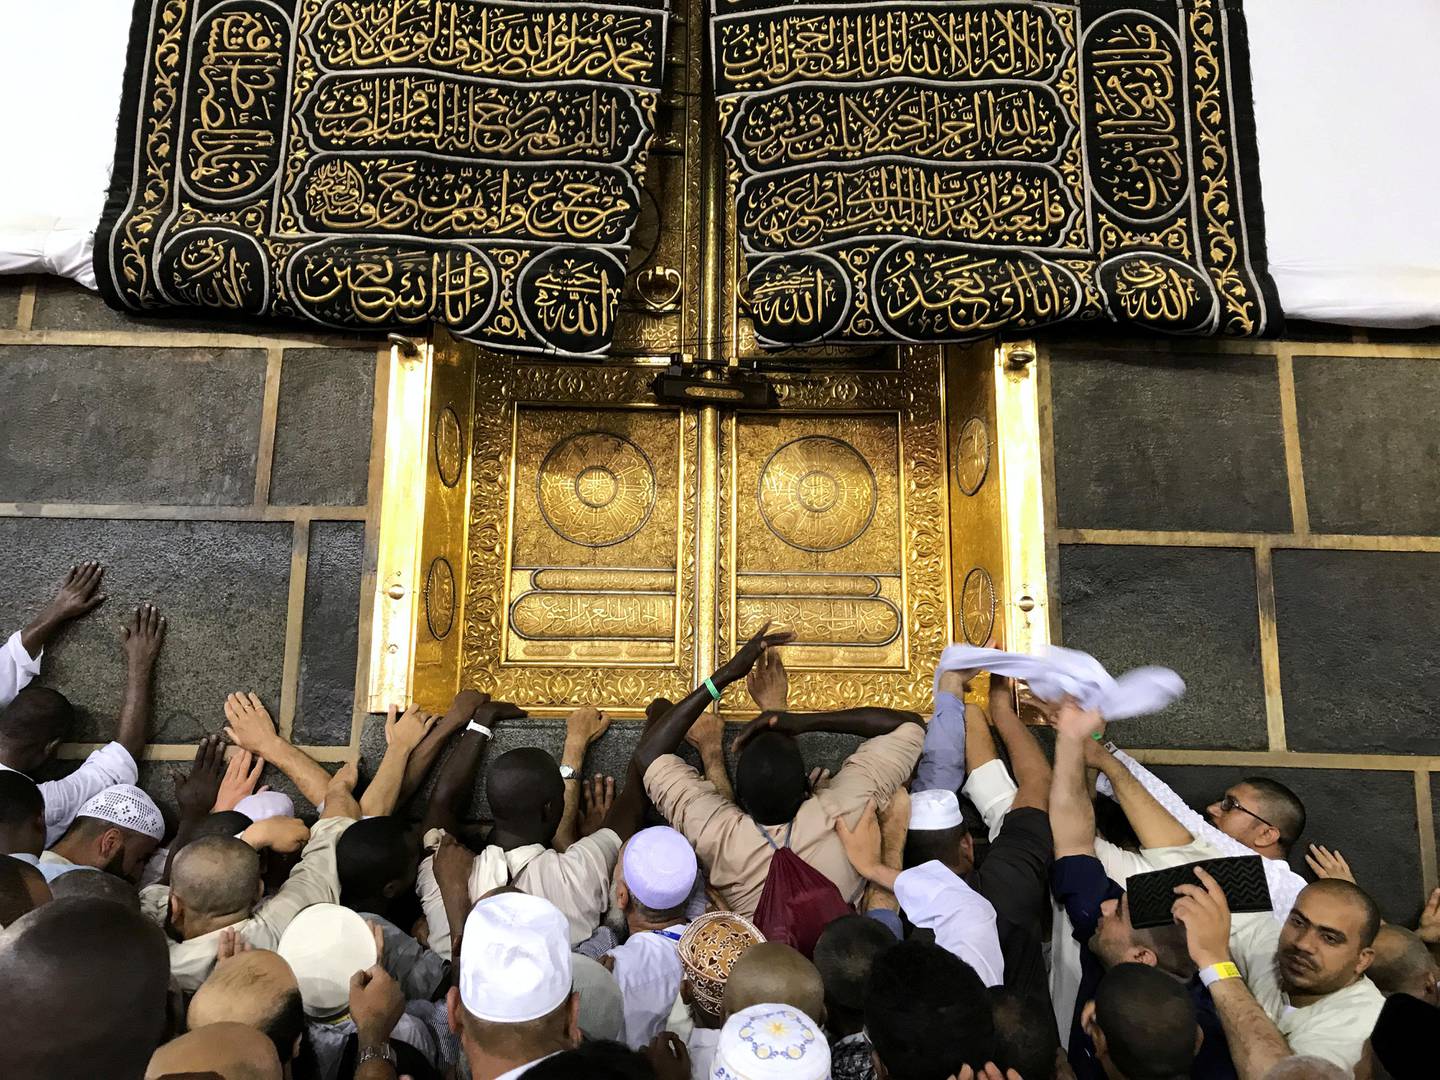 Muslims touch the Kaaba at the Grand mosque ahead of the annual Haj pilgrimage in Mecca, Saudi Arabia, August 26, 2017. REUTERS/Suhaib Salem